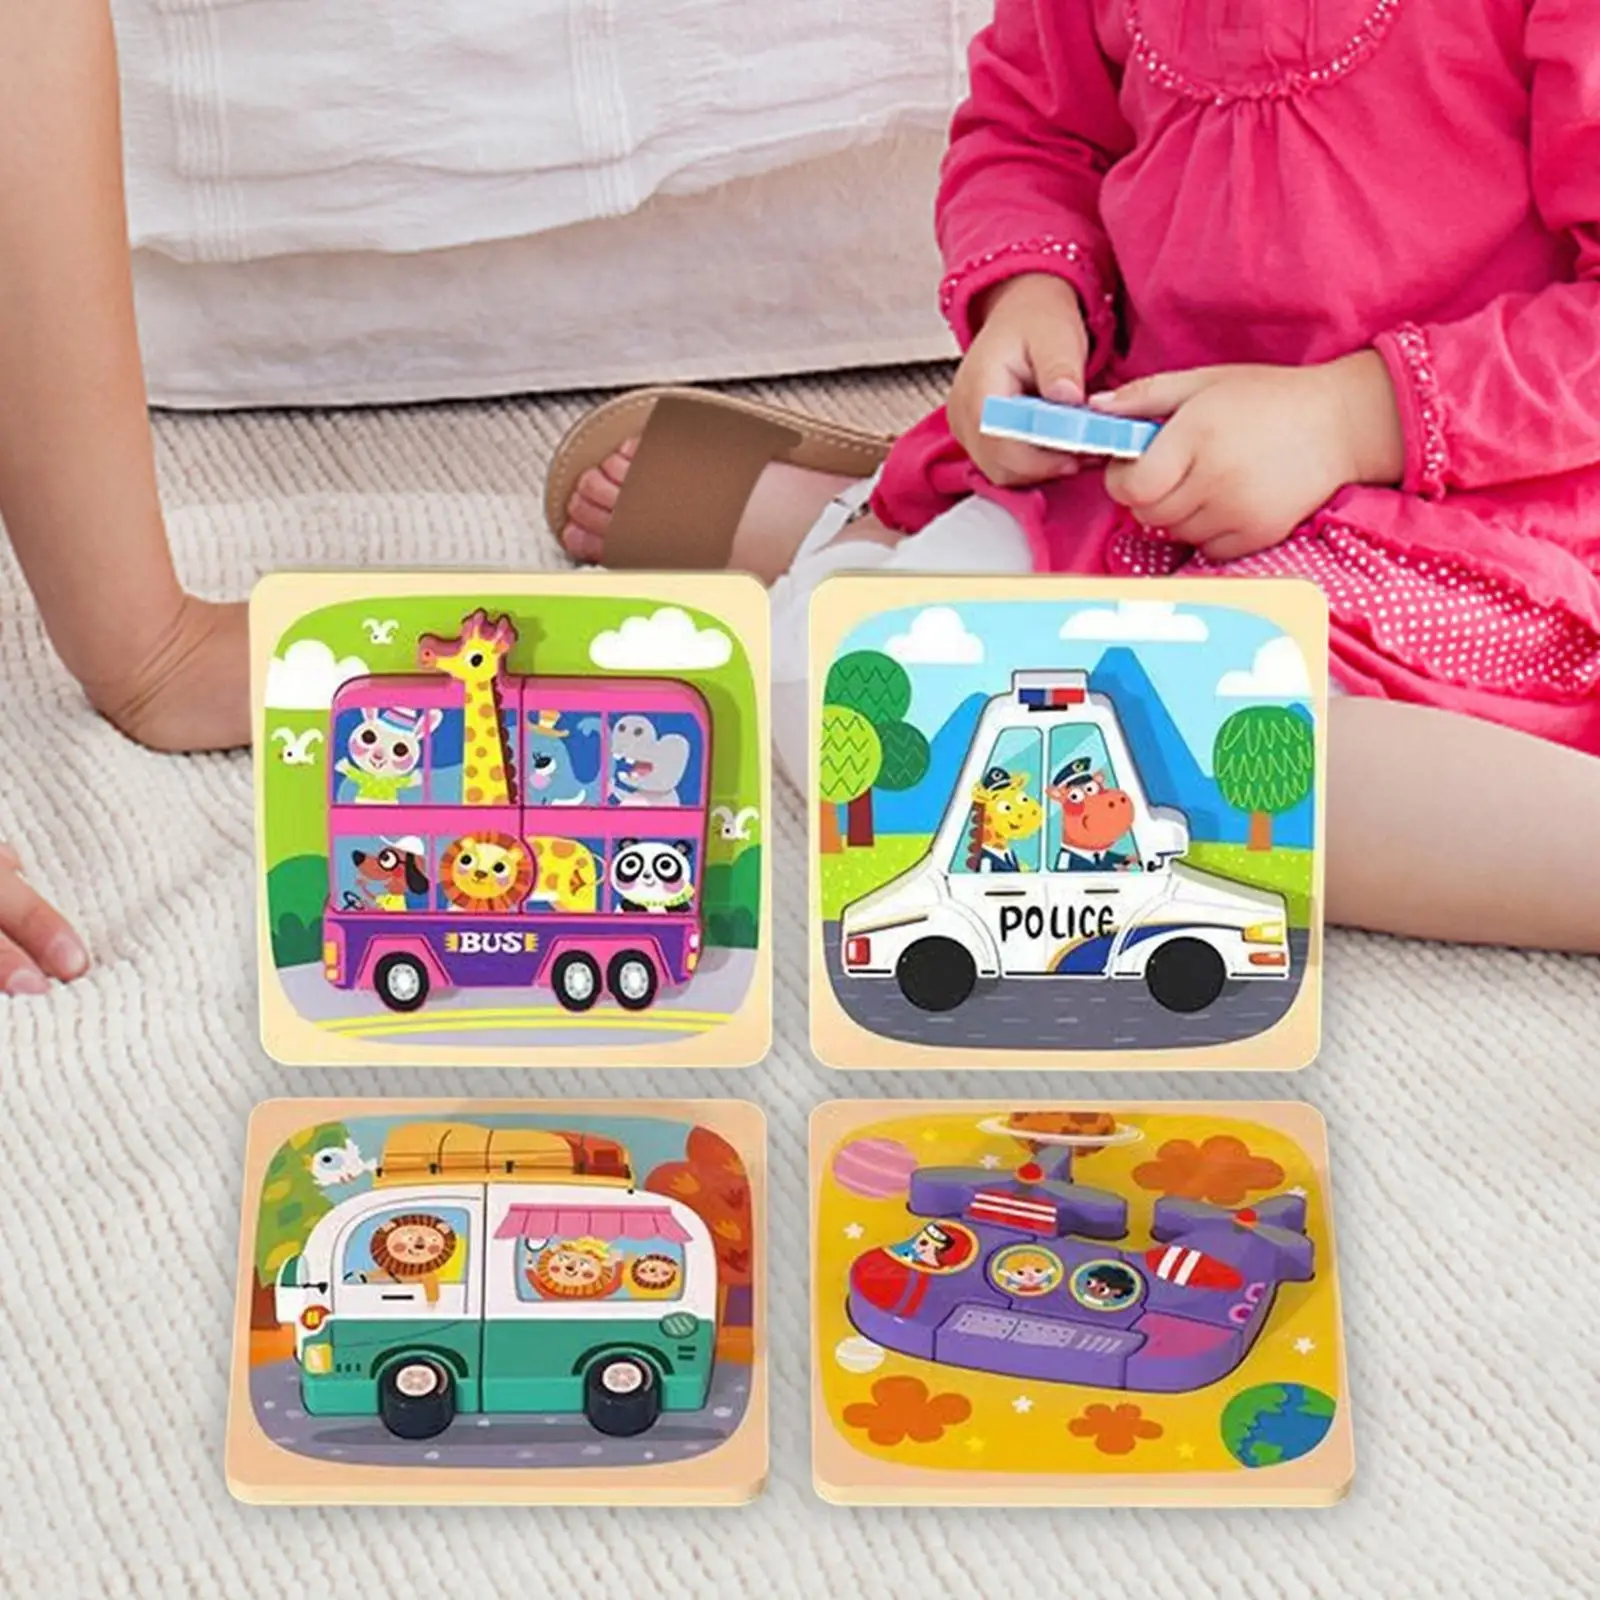 4 Pieces Montessori Wooden Puzzle Educational Toy Sensory Learning Toy for Girls